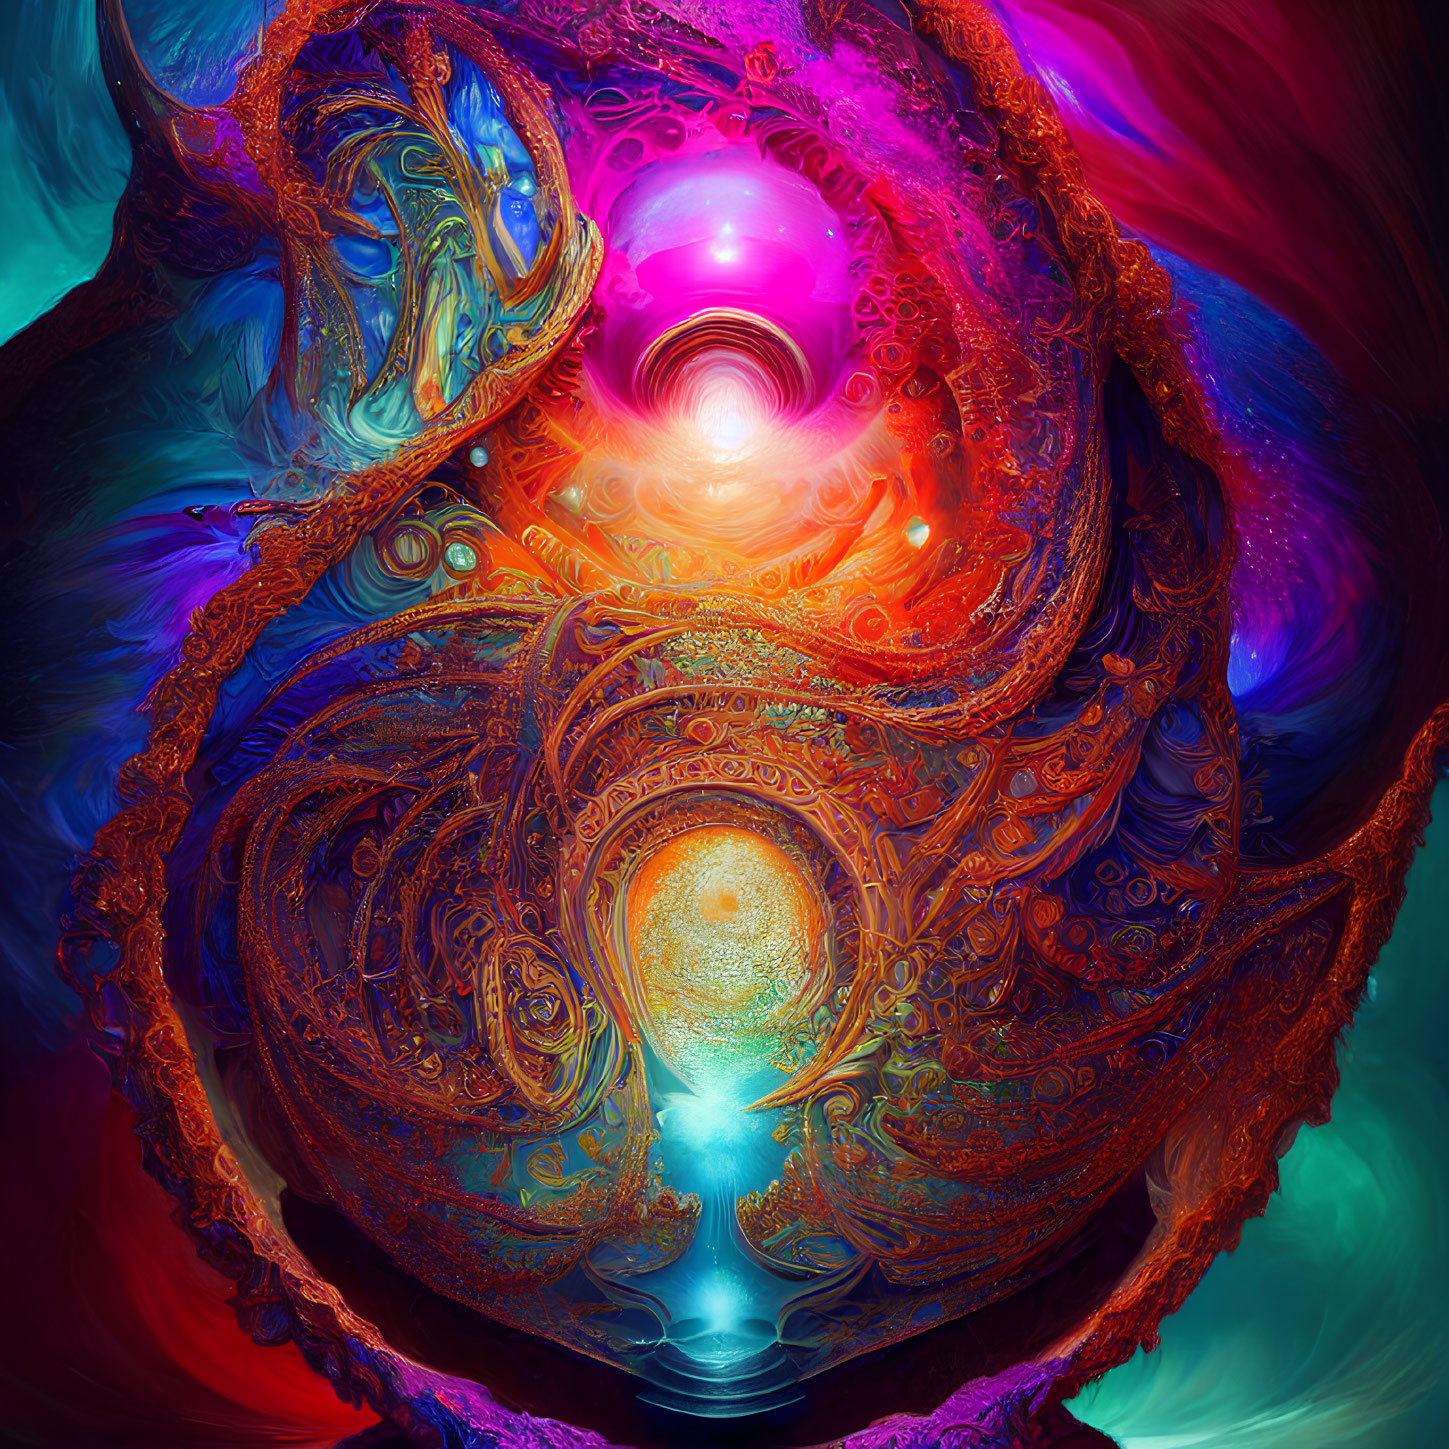 Colorful Abstract Fractal Art with Swirling Patterns and Glowing Orb